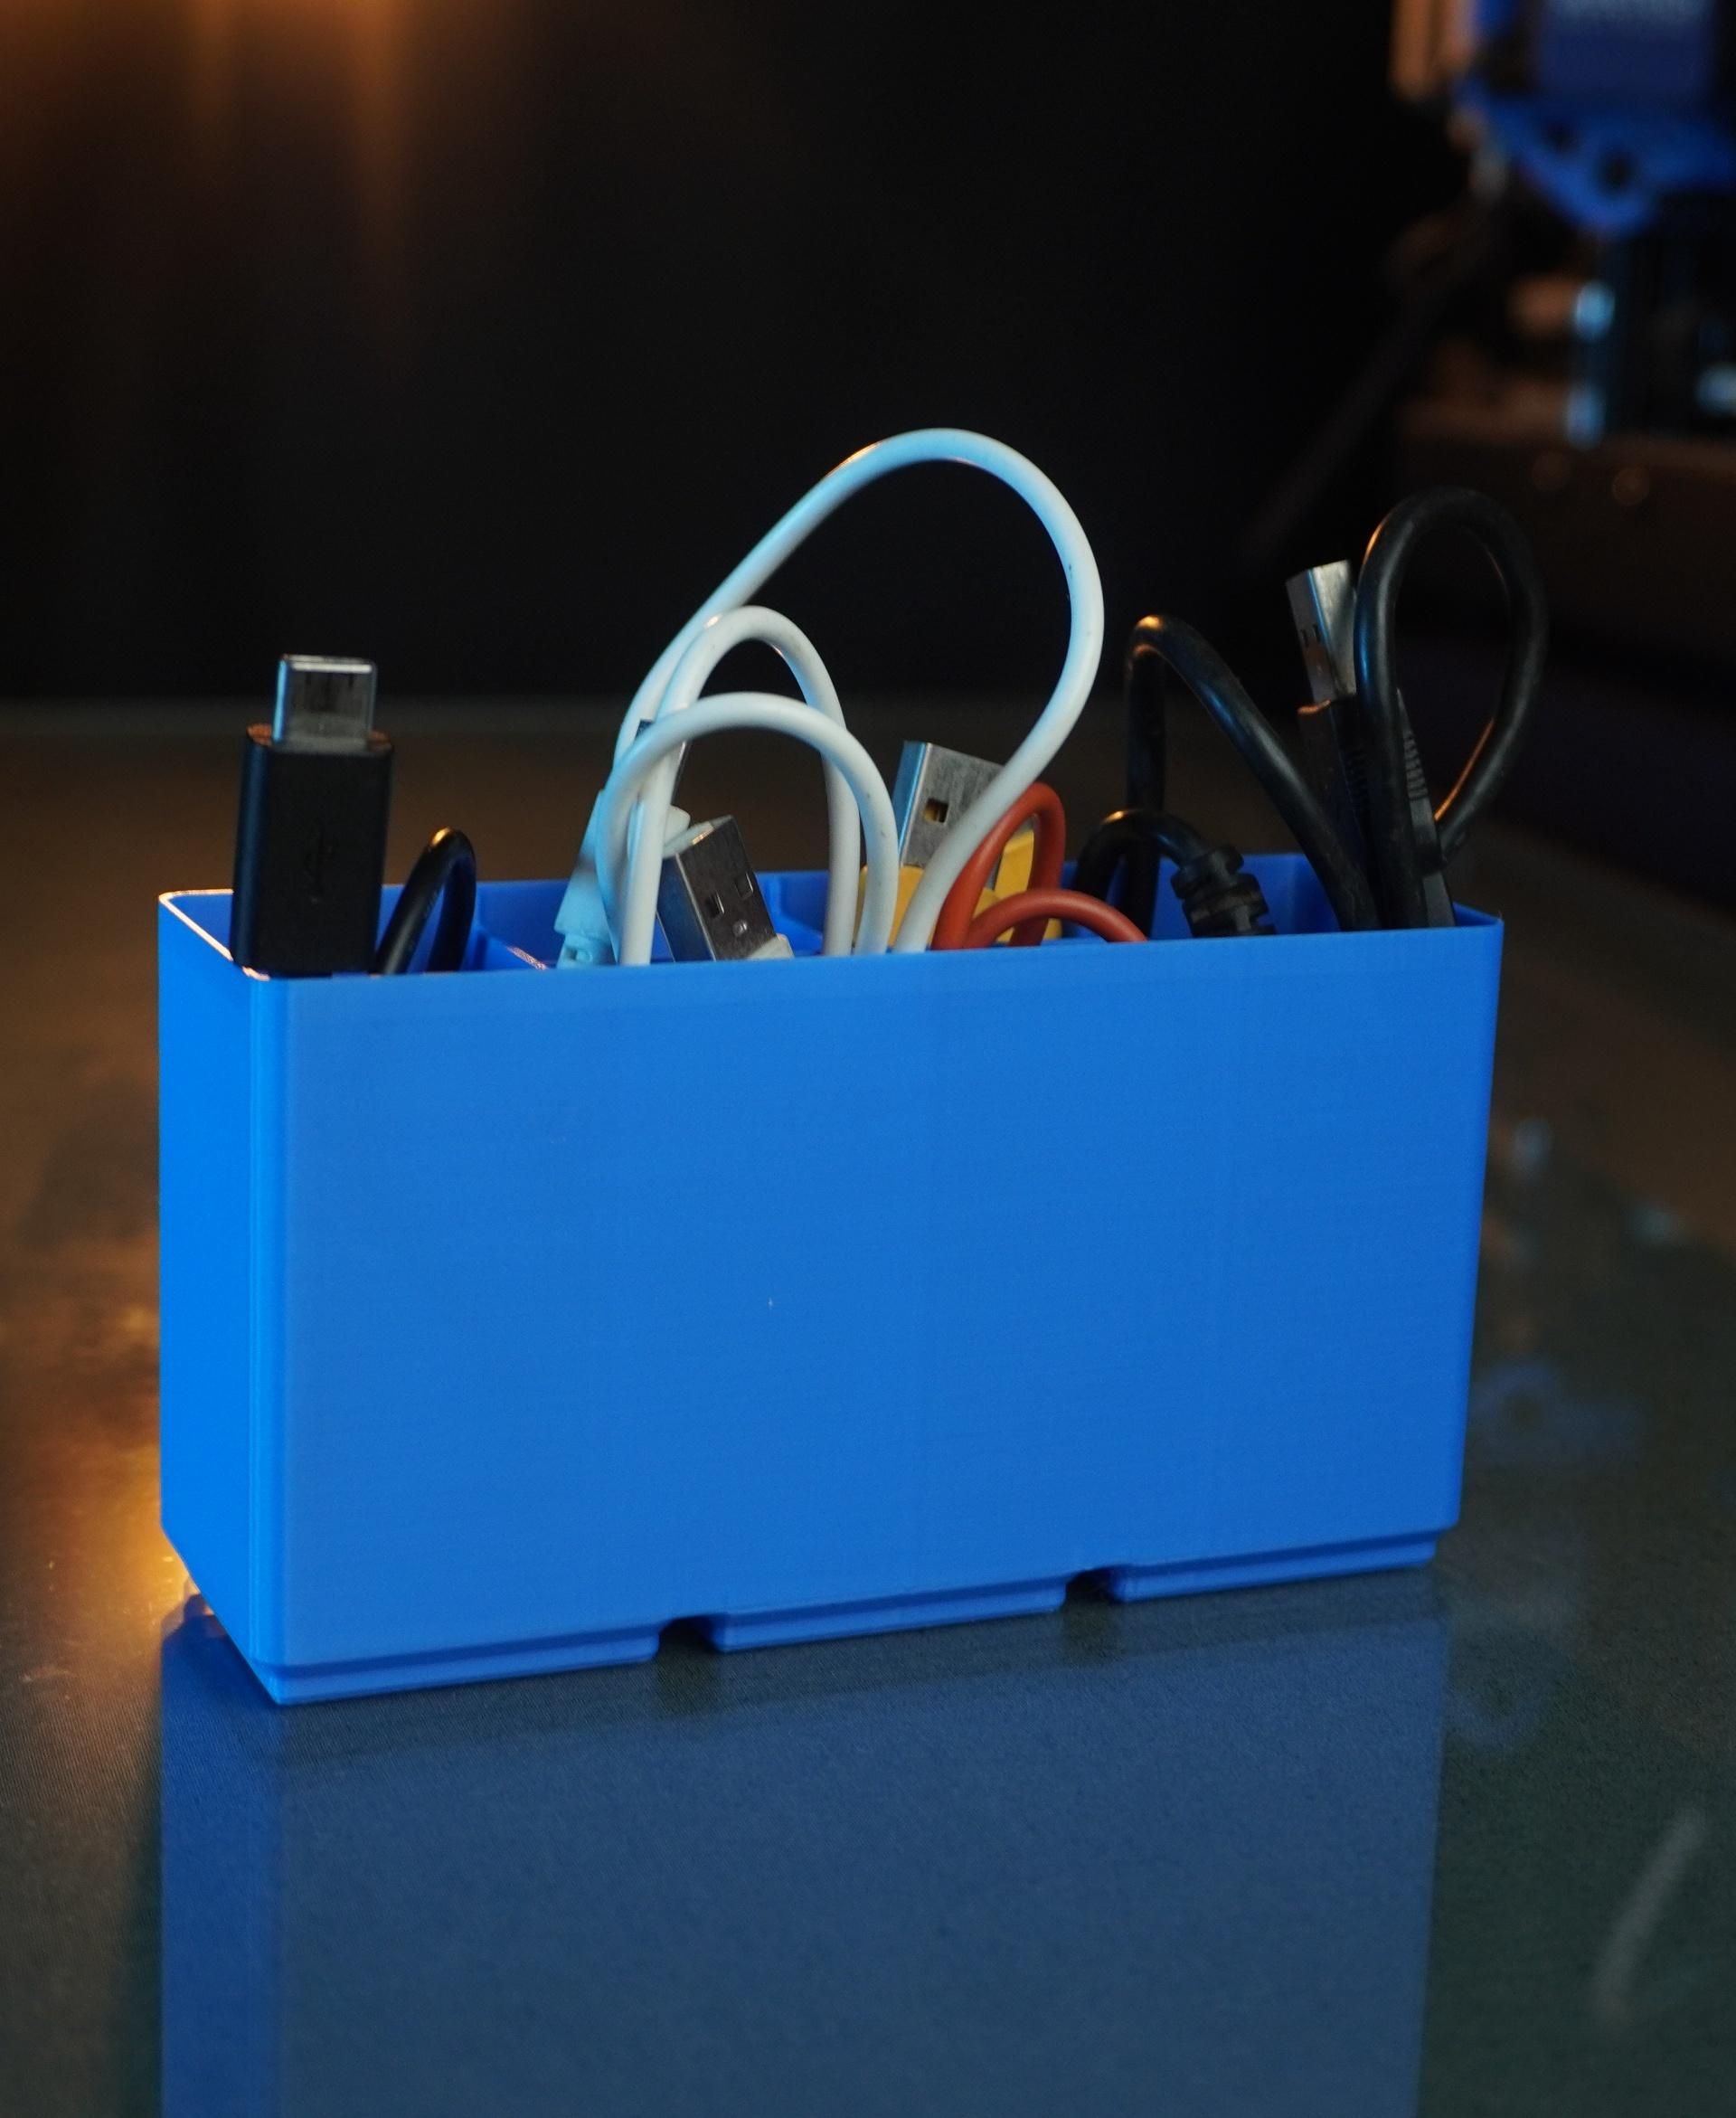 Gridfinity 6 Compartment USB Cable Bin (hollow bottom for space) - Amazing design to print👍 This video will help you to see the function of this model: https://youtu.be/3IeGDW97KRA - 3d model